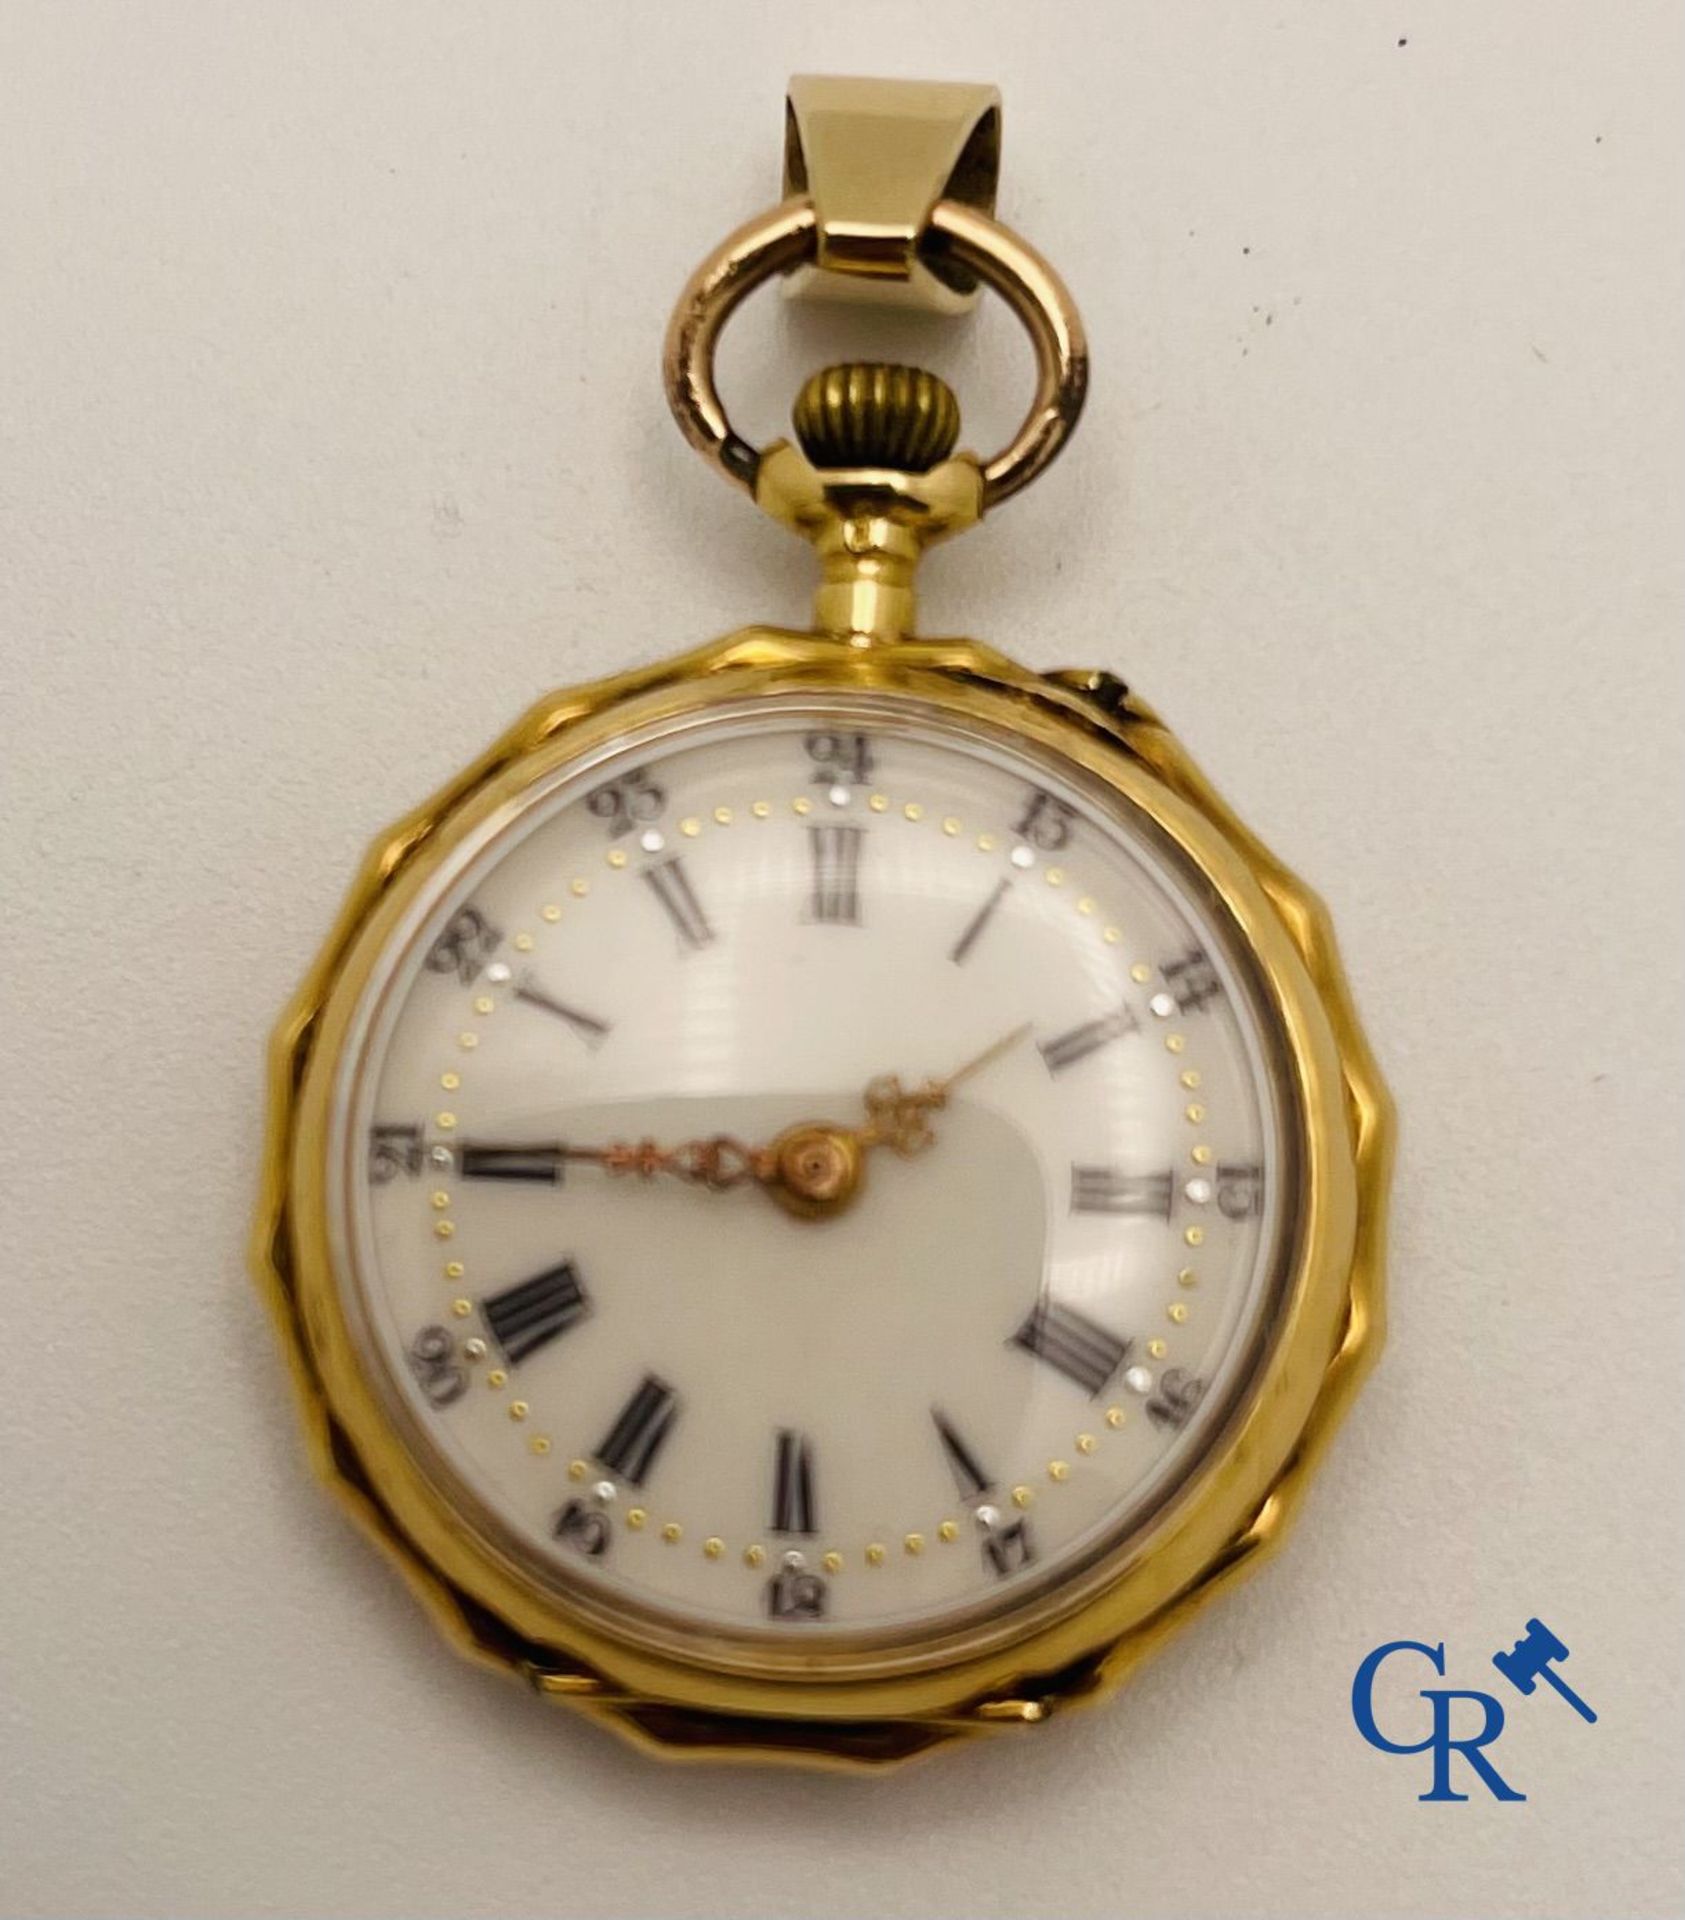 Jewel/Watches: Pearl necklace with clasp in white gold 18K and a women's pocket watch in gold 18K. - Bild 6 aus 7